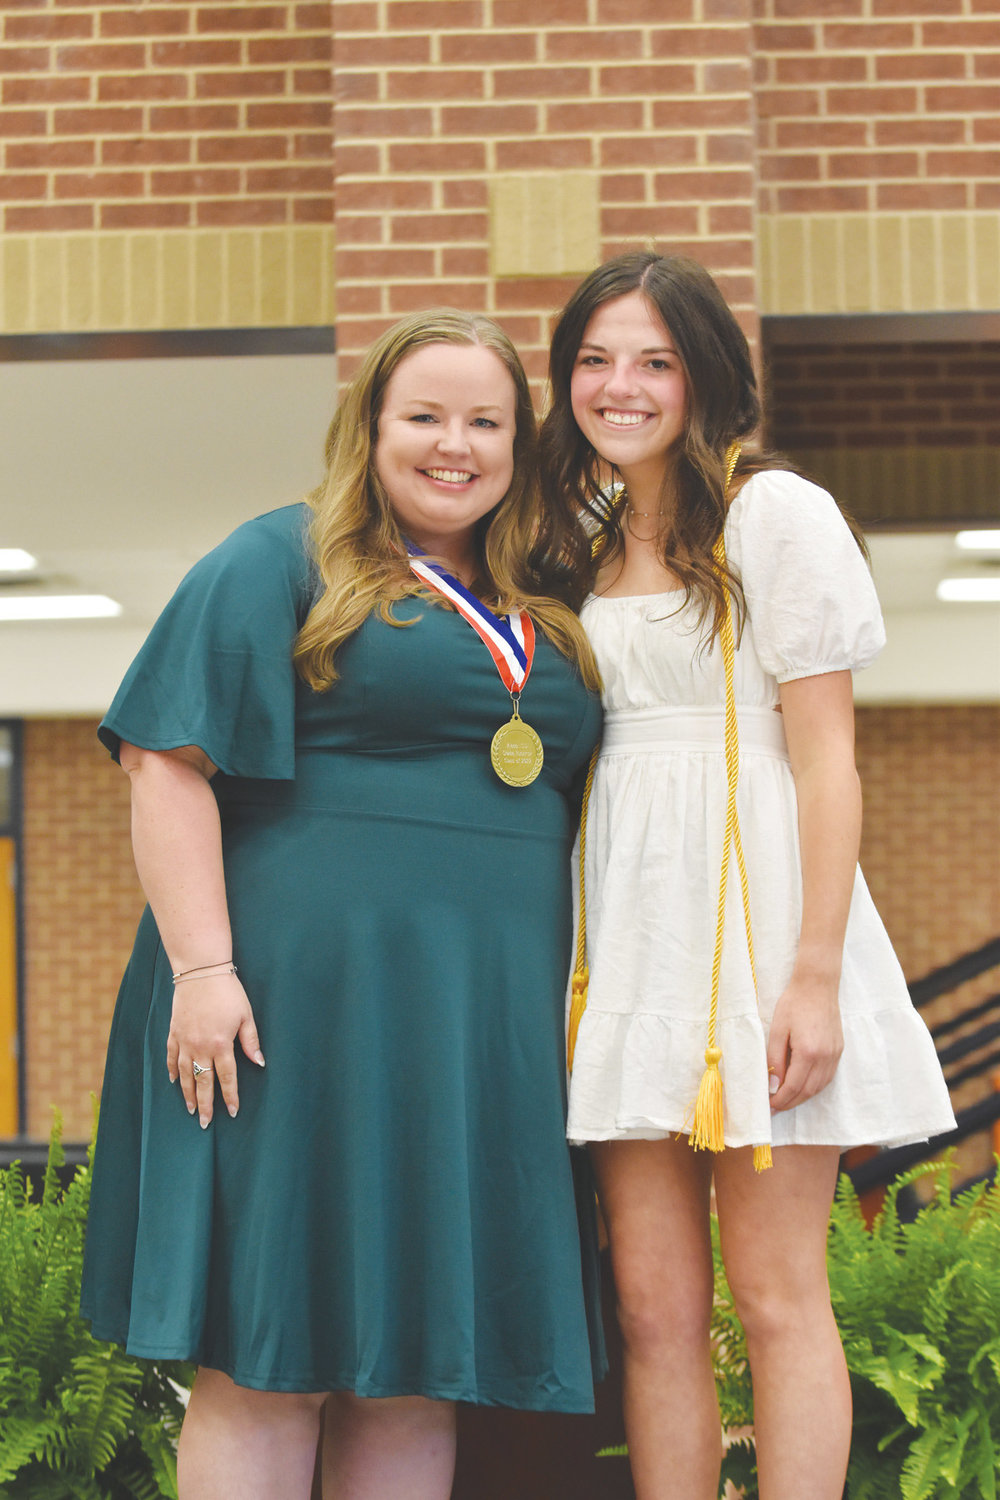 Grace Rudzinski is the daughter of Dawn and Kris Rudzinski. She plans to attend Texas A&M University, and major in biomedical sciences. After her undergrad, Grace plans on going to medical school in hopes of becoming a pediatric oncologist. she honored Mrs. Courteney Goforth.